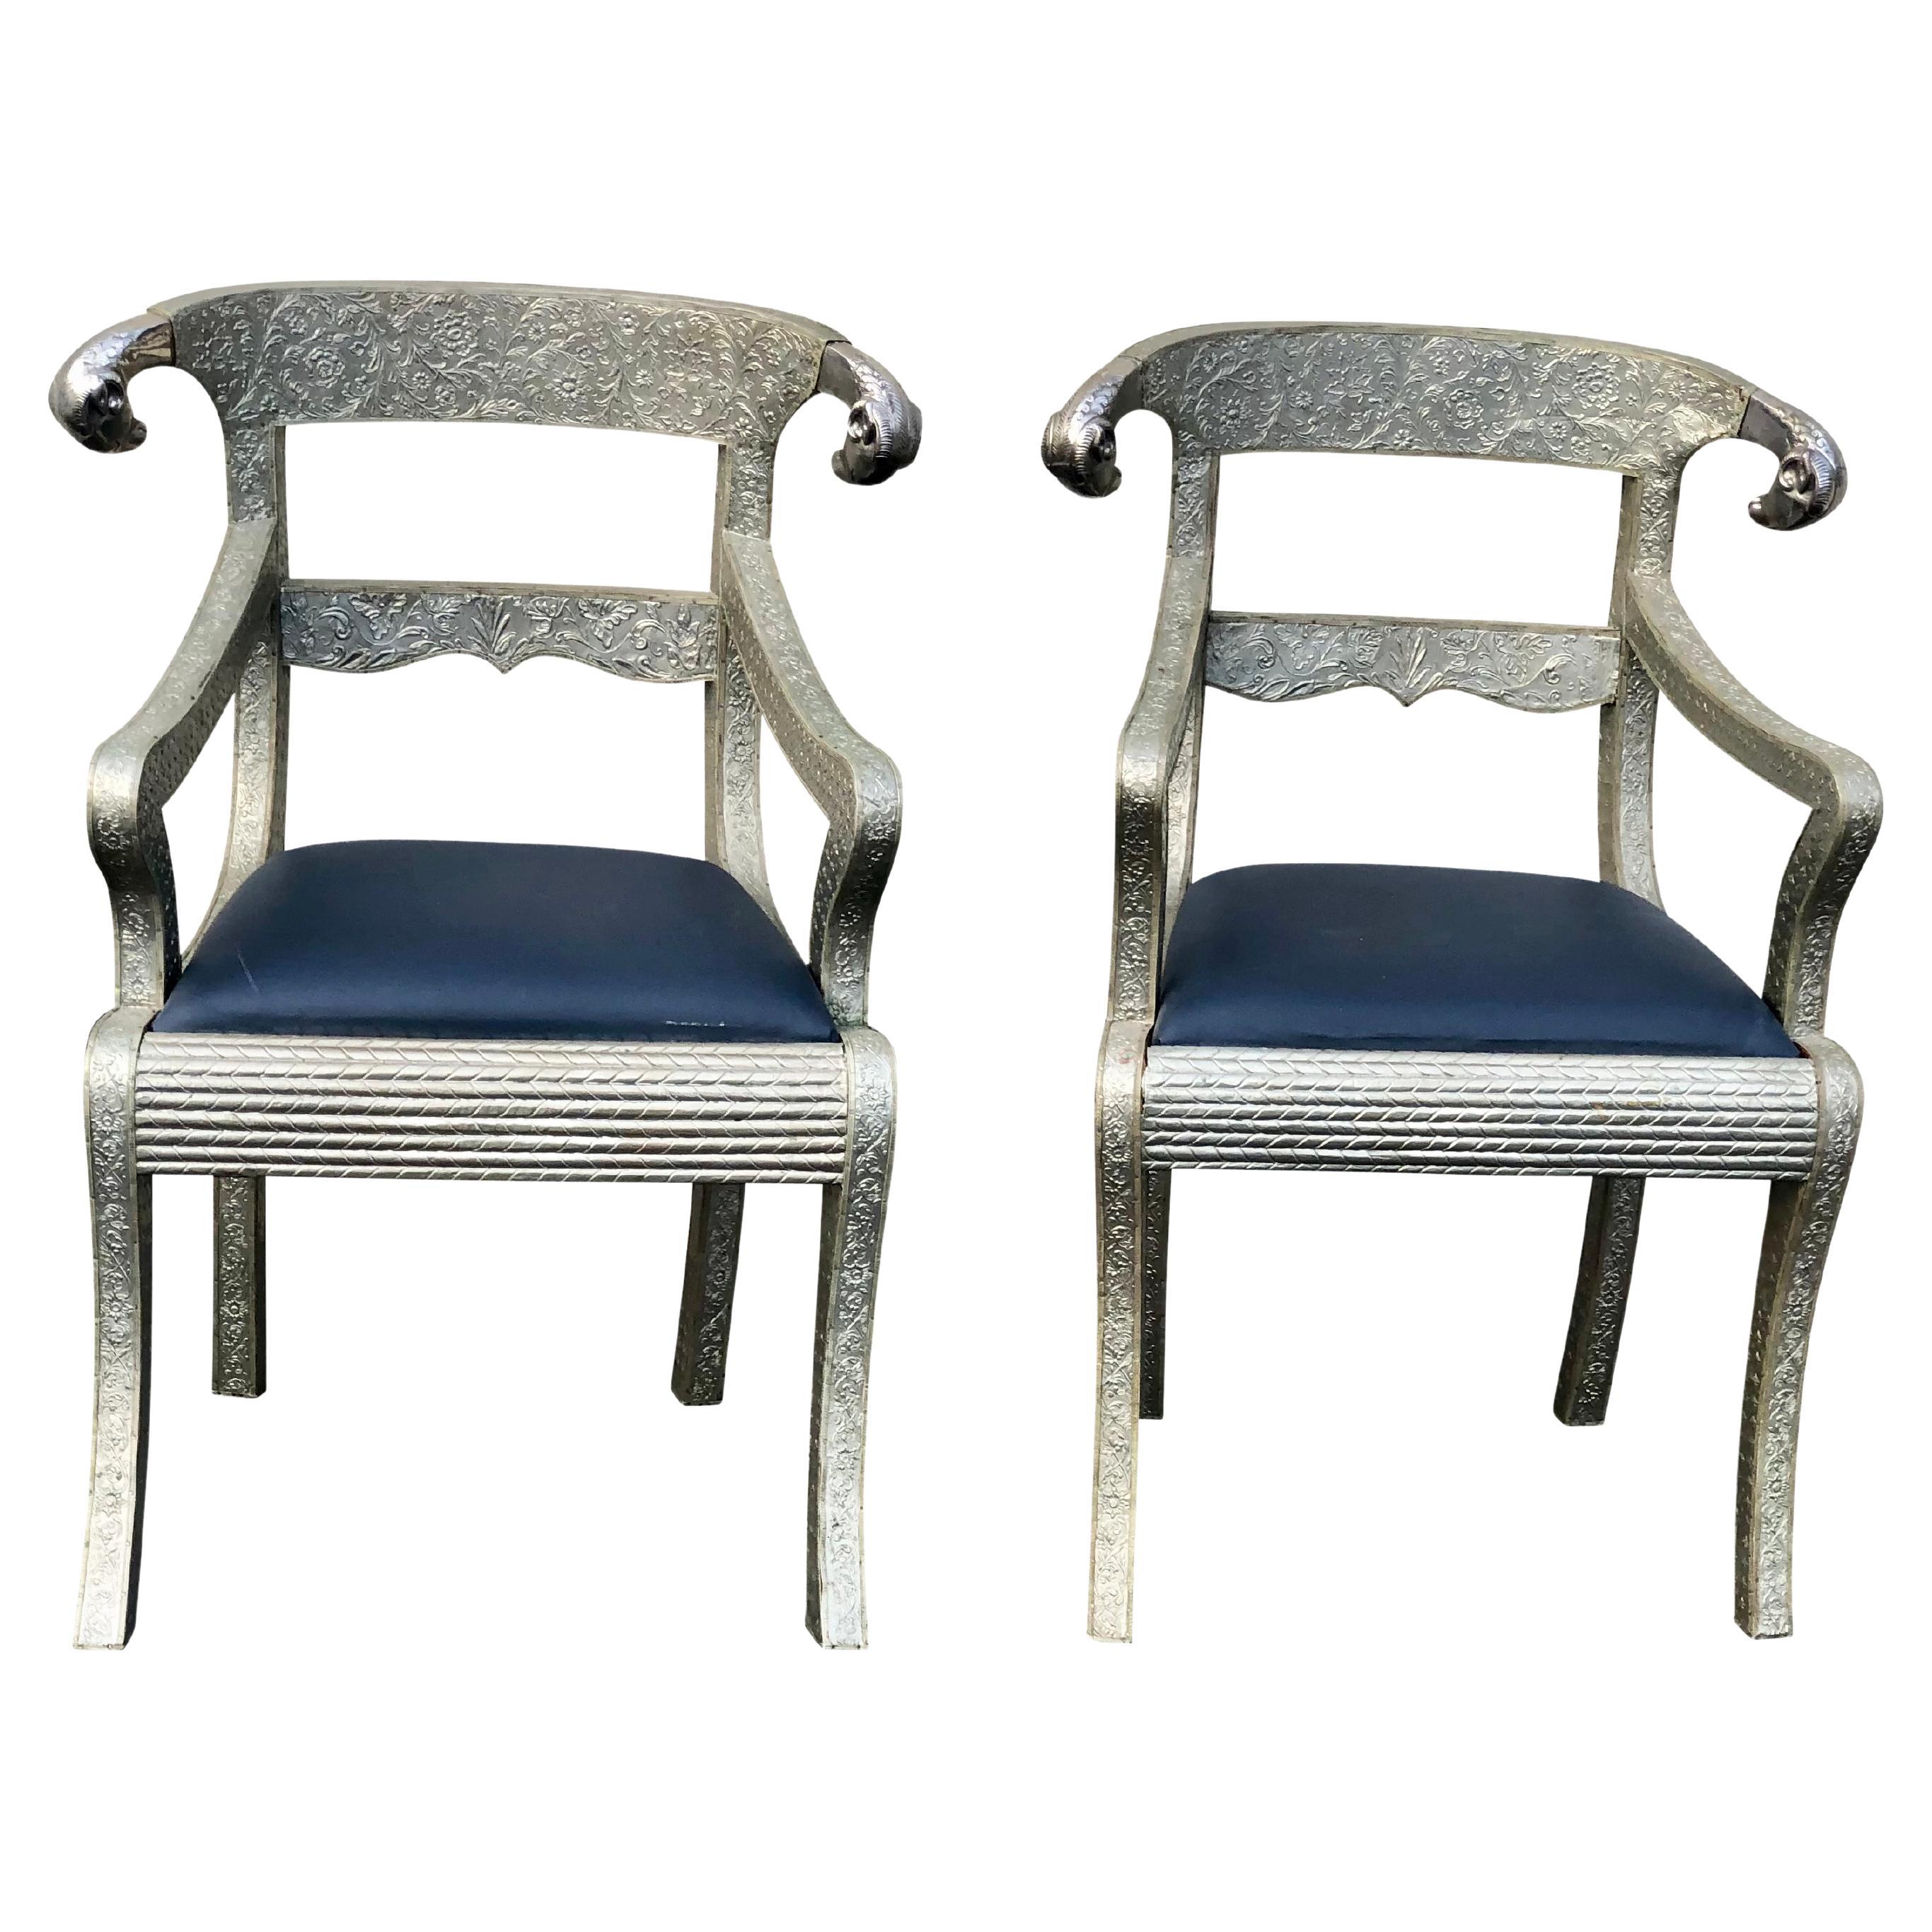 Pair of Anglo Indian Silver Metal Clad Armchairs With Rams Heads.